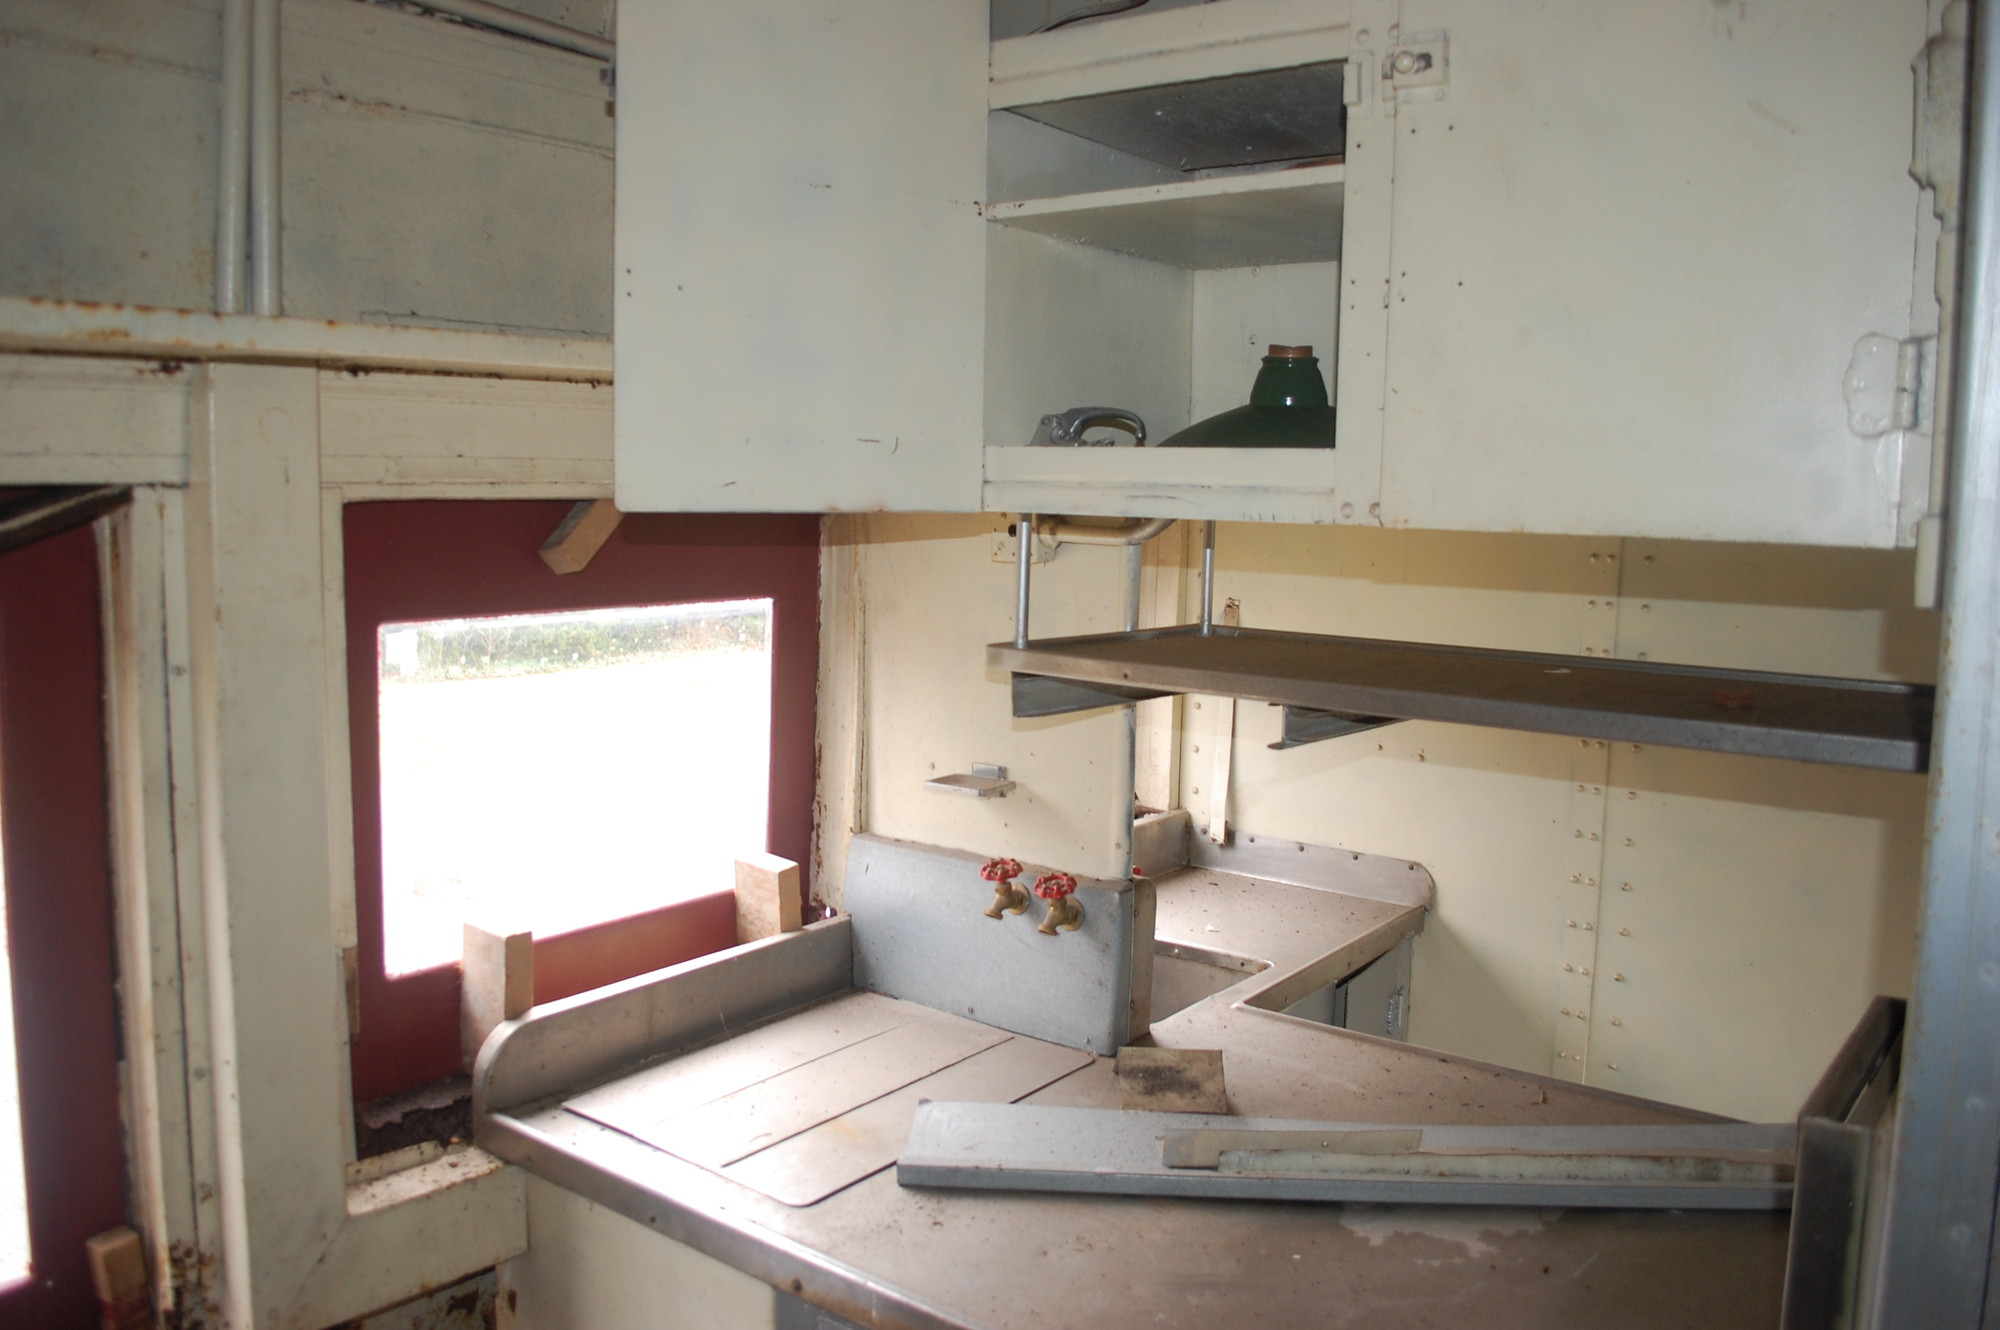 The old kitchen in the train car will be overhauled.